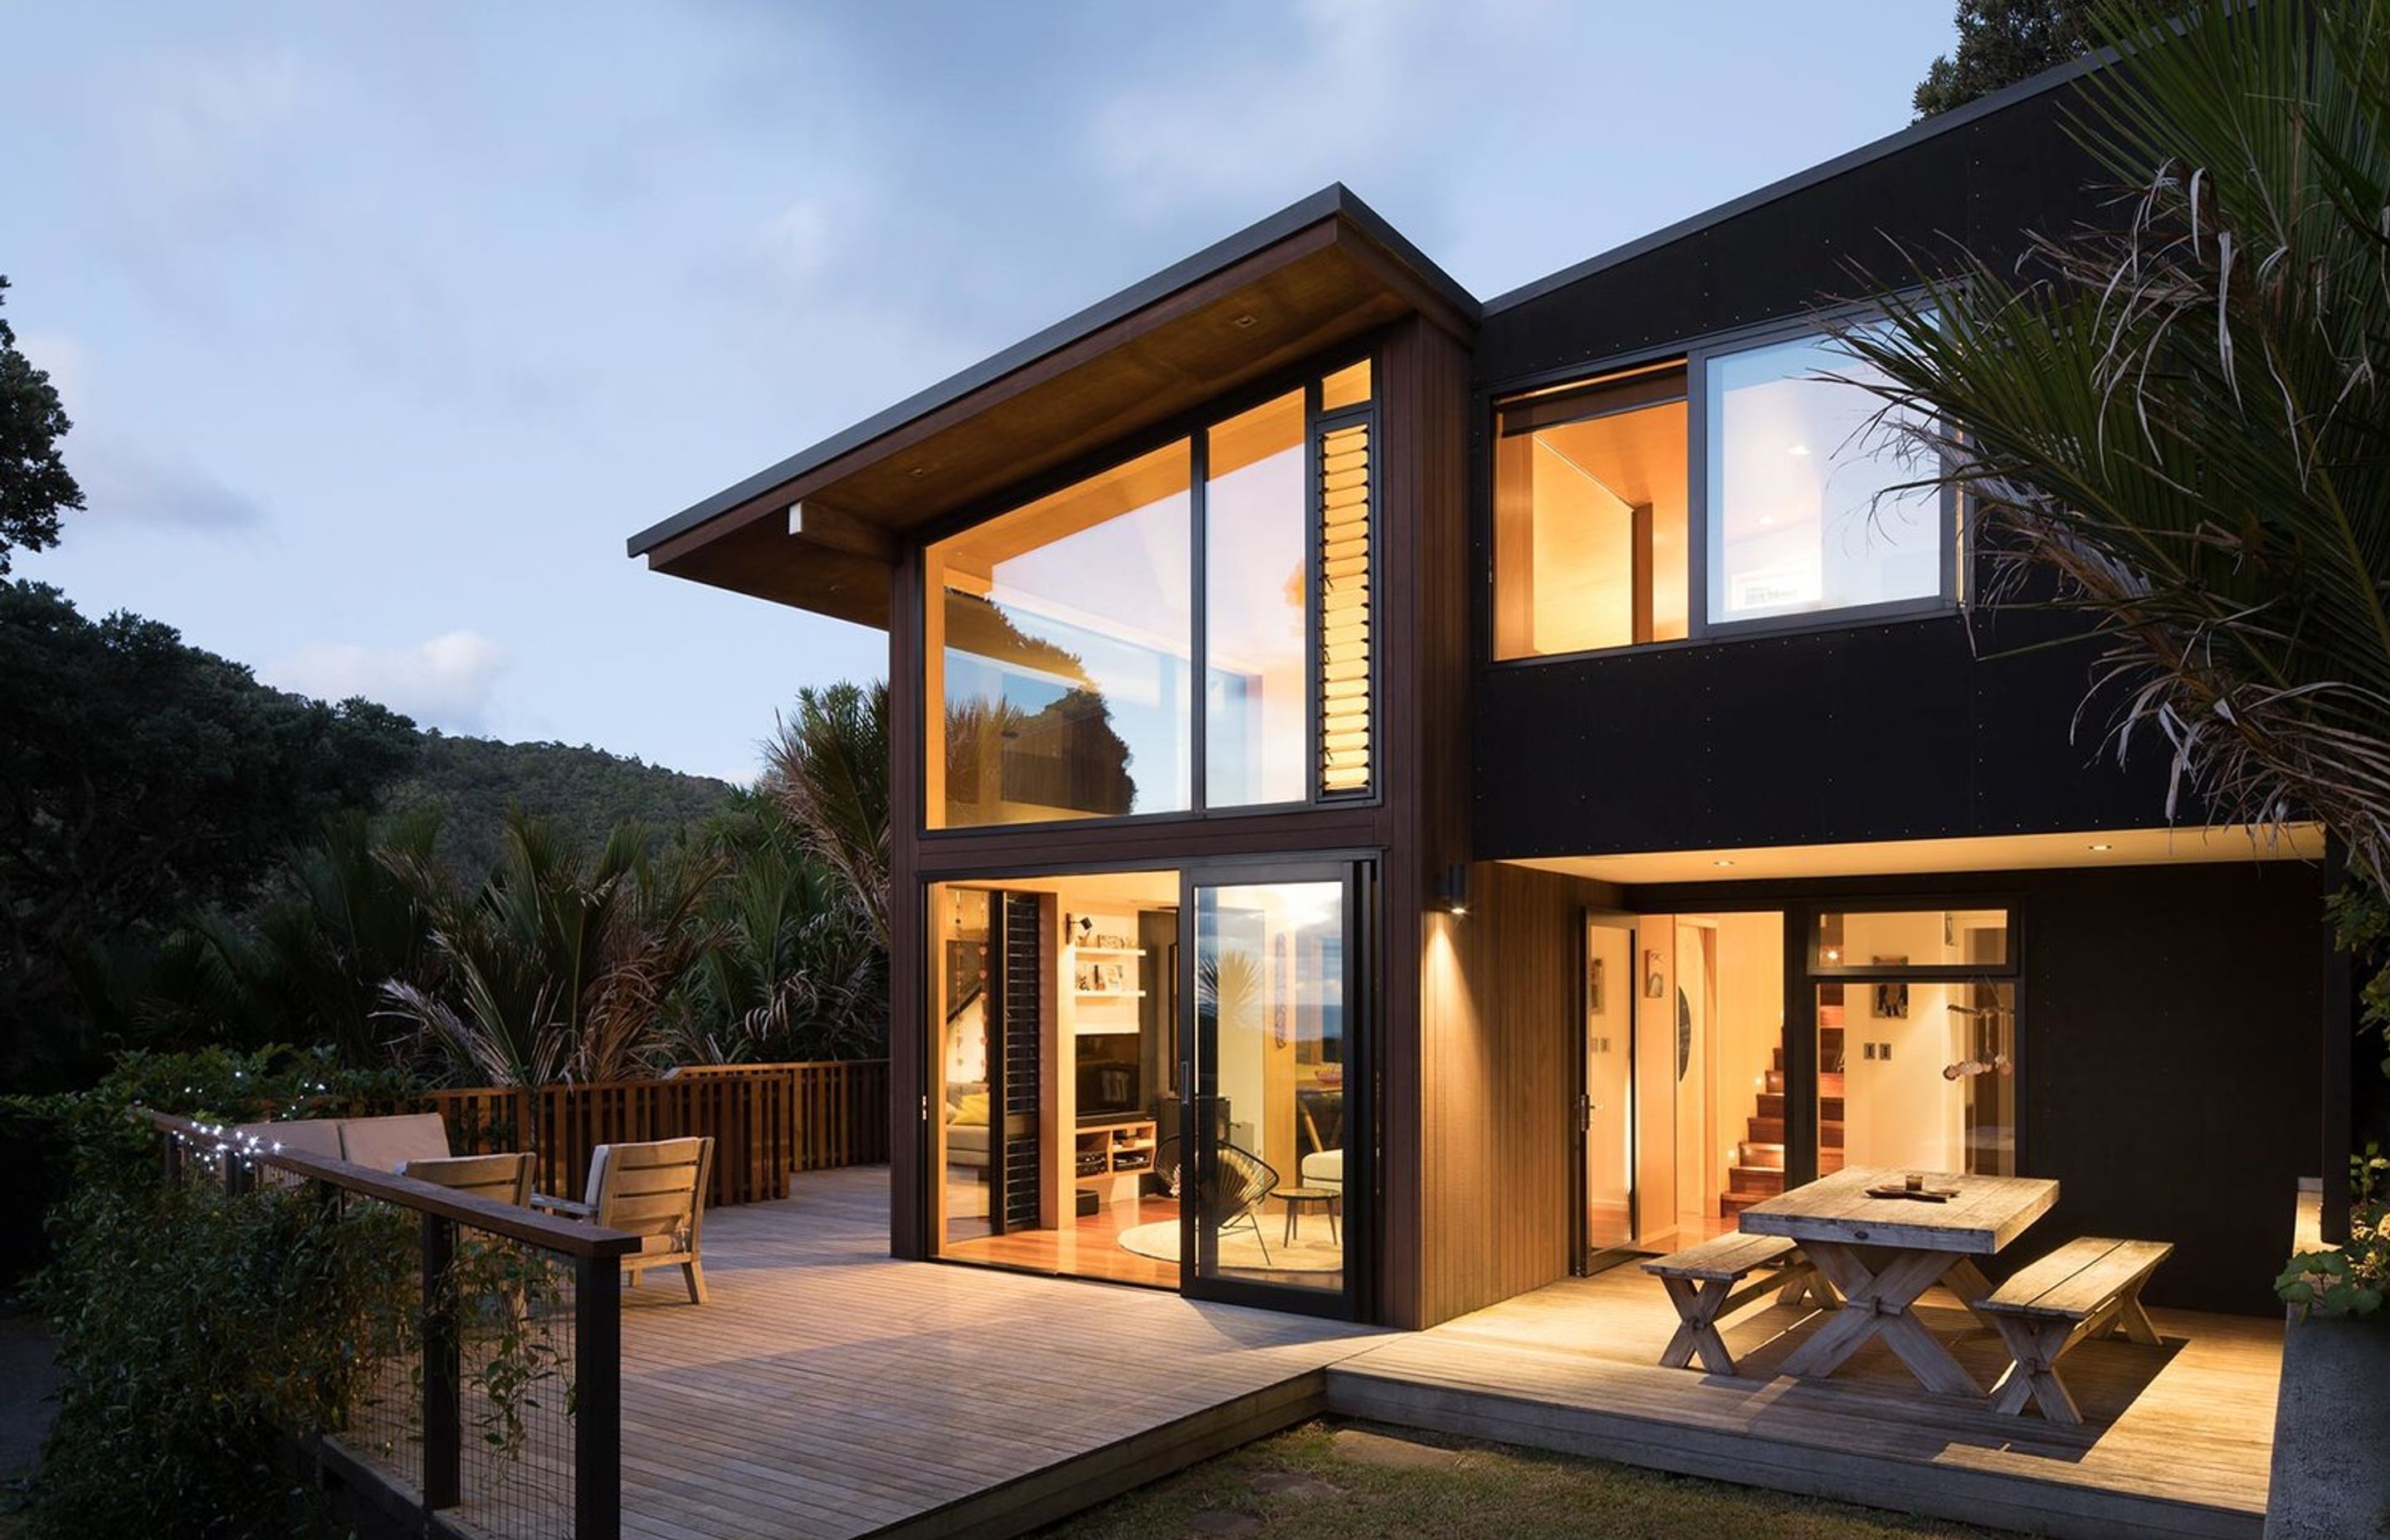 This modest home at the iconic Piha Beach is designed to capture views of bush and sky.